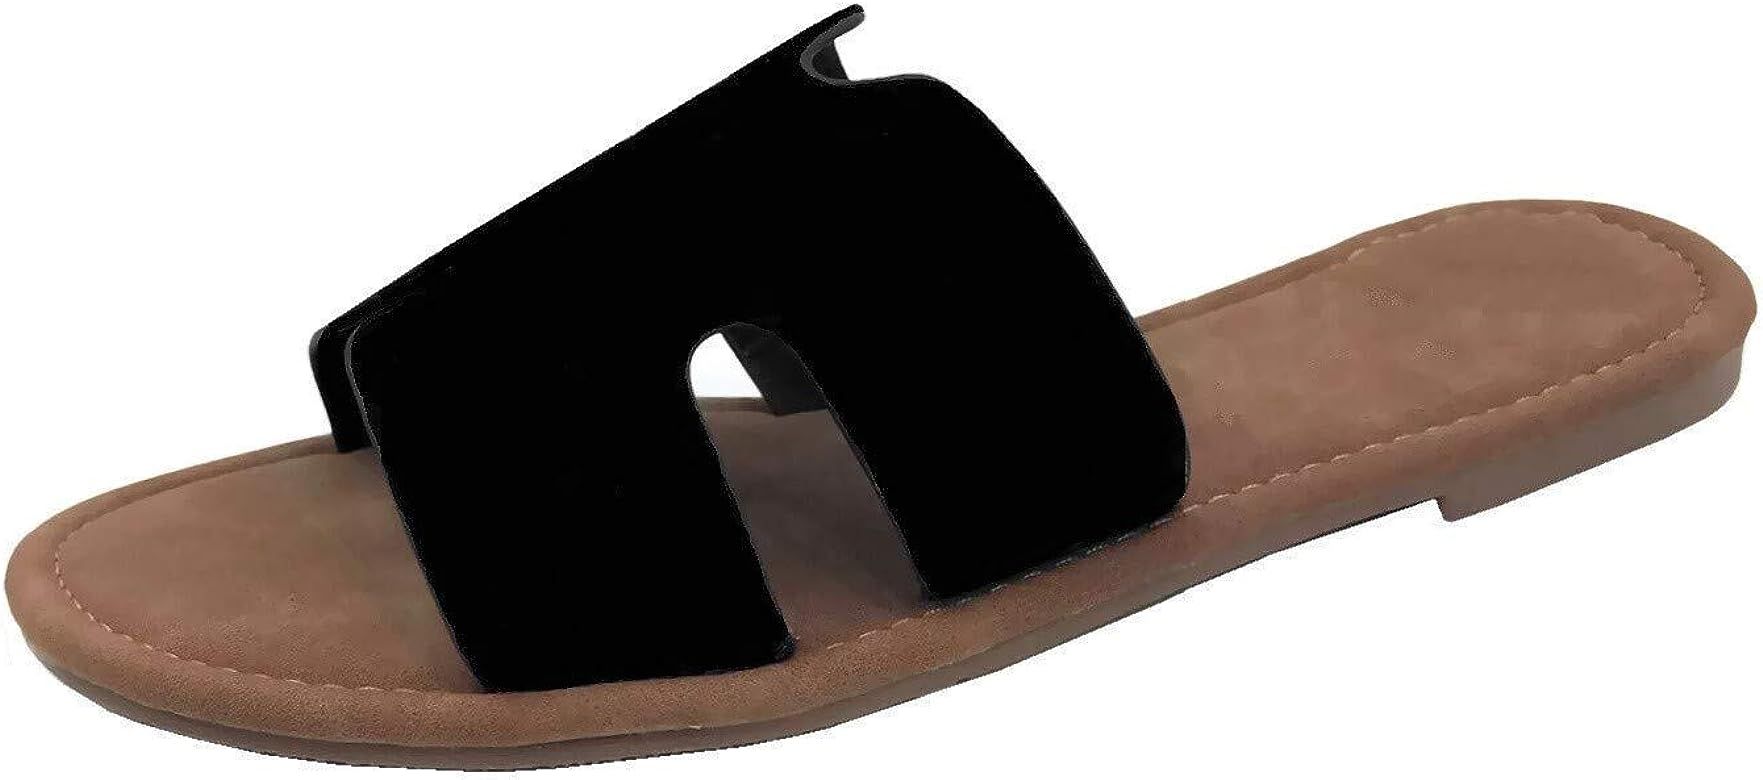 Womens Slip On Slide Flat Sandal with Notch Cut-Outs | Amazon (US)